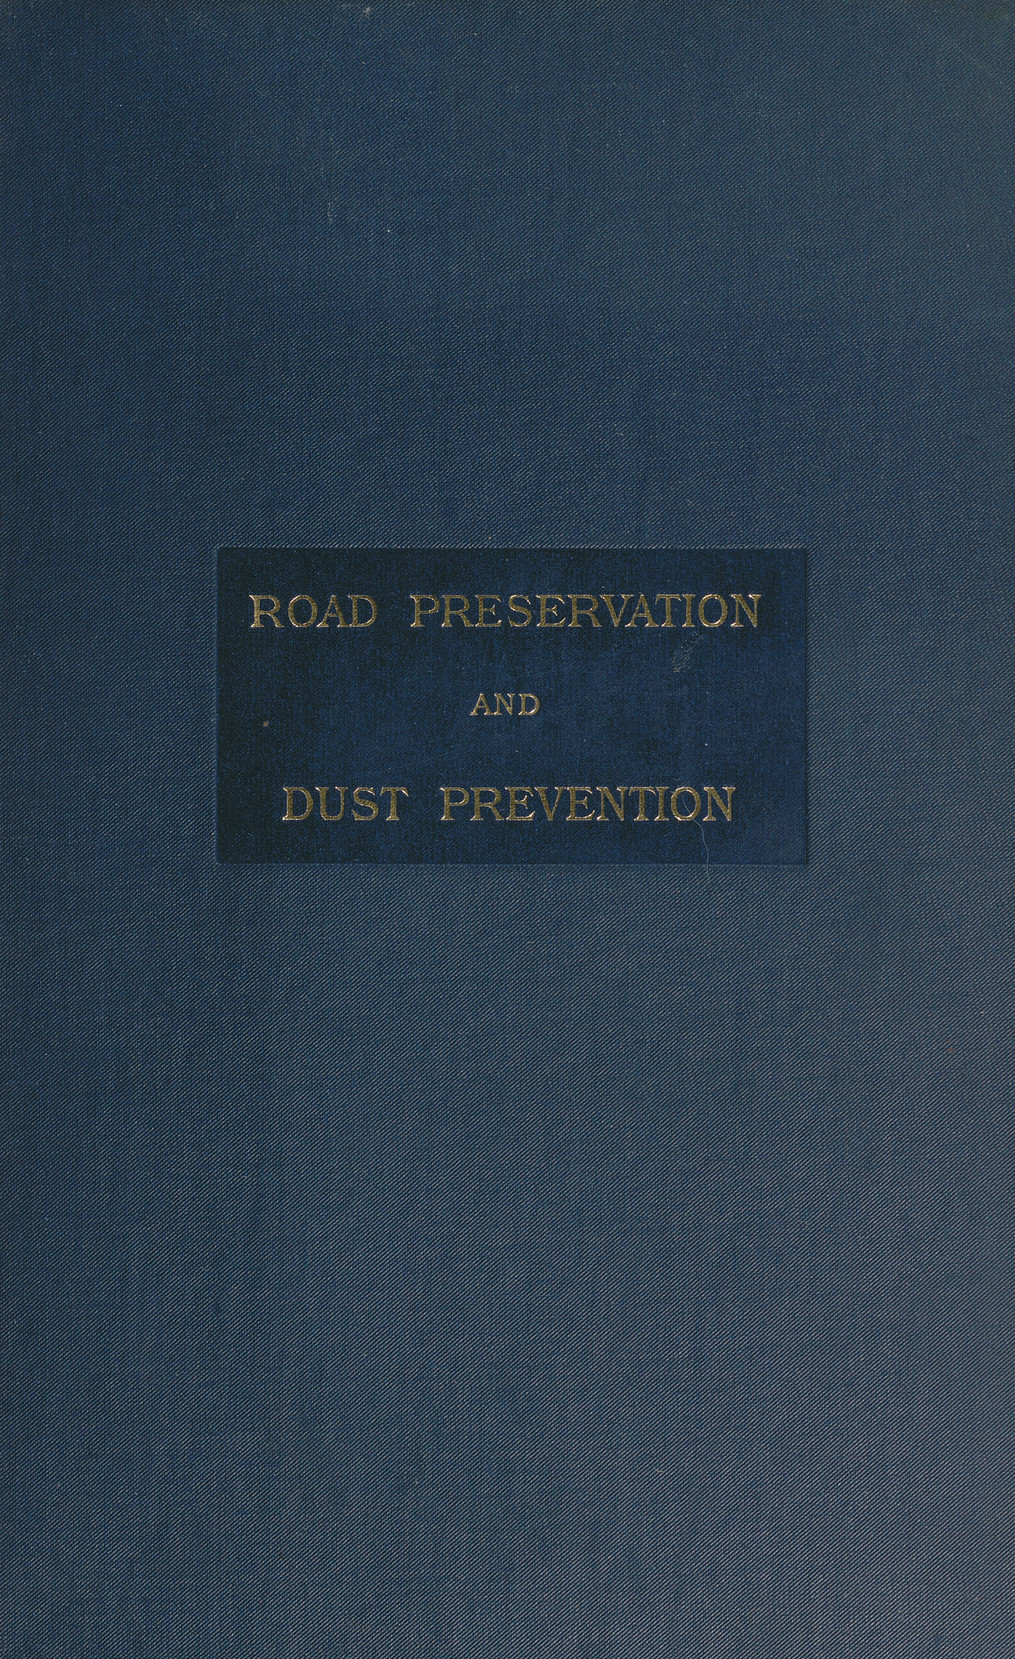 Road preservation and dust prevention